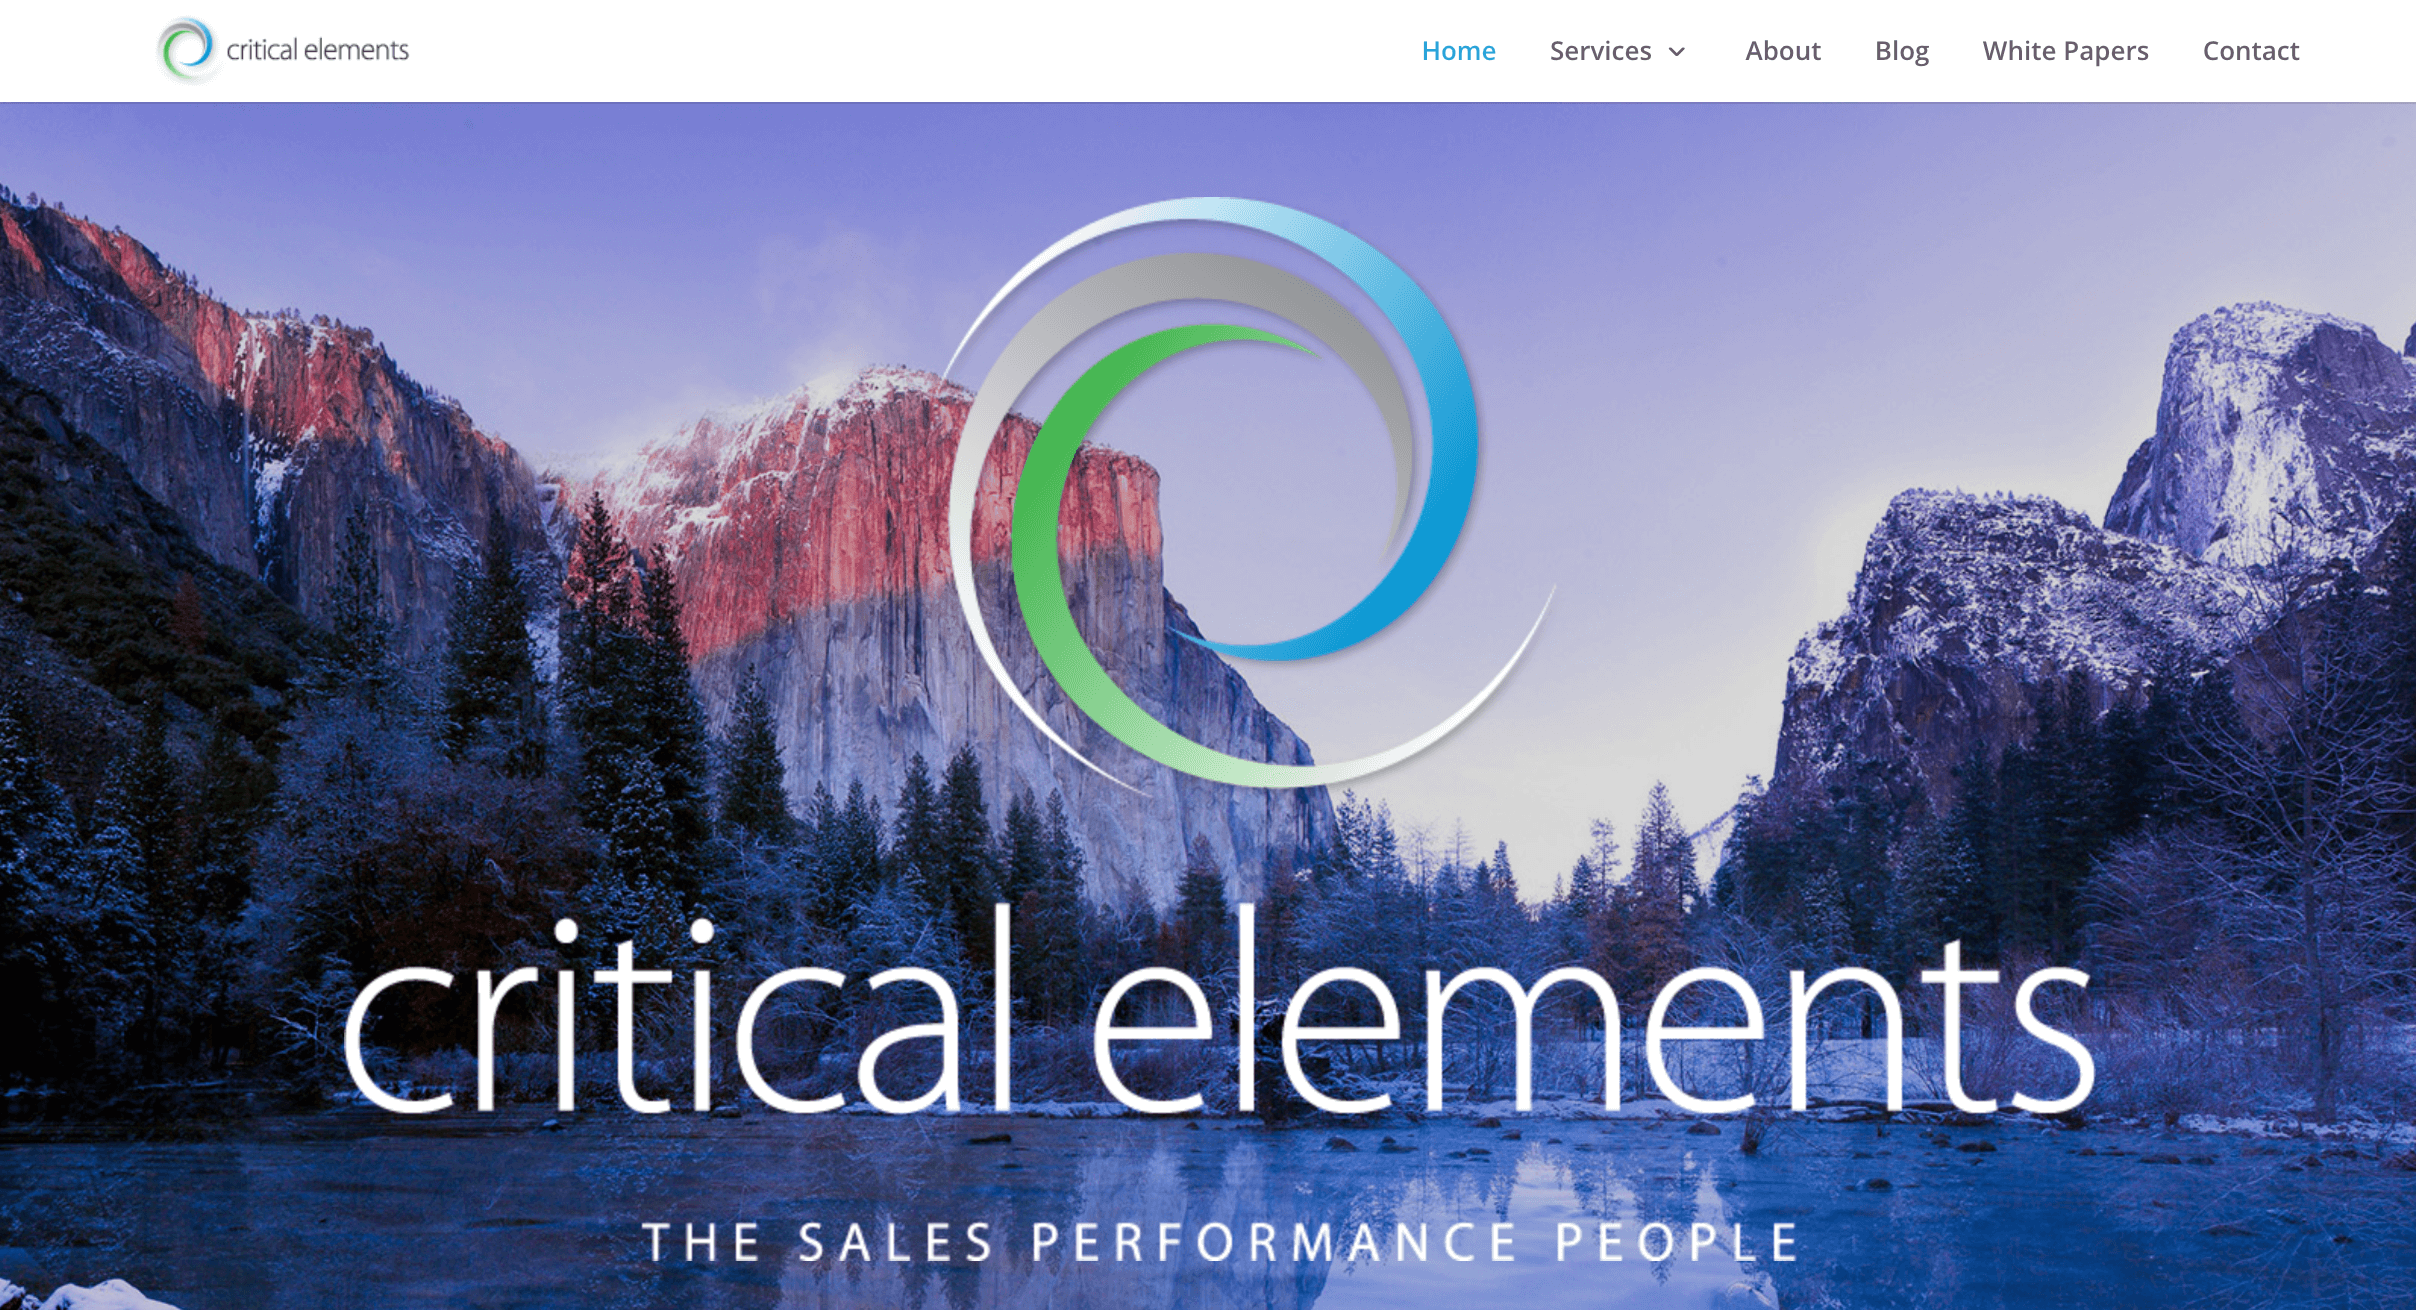 Critical Elements Home Page